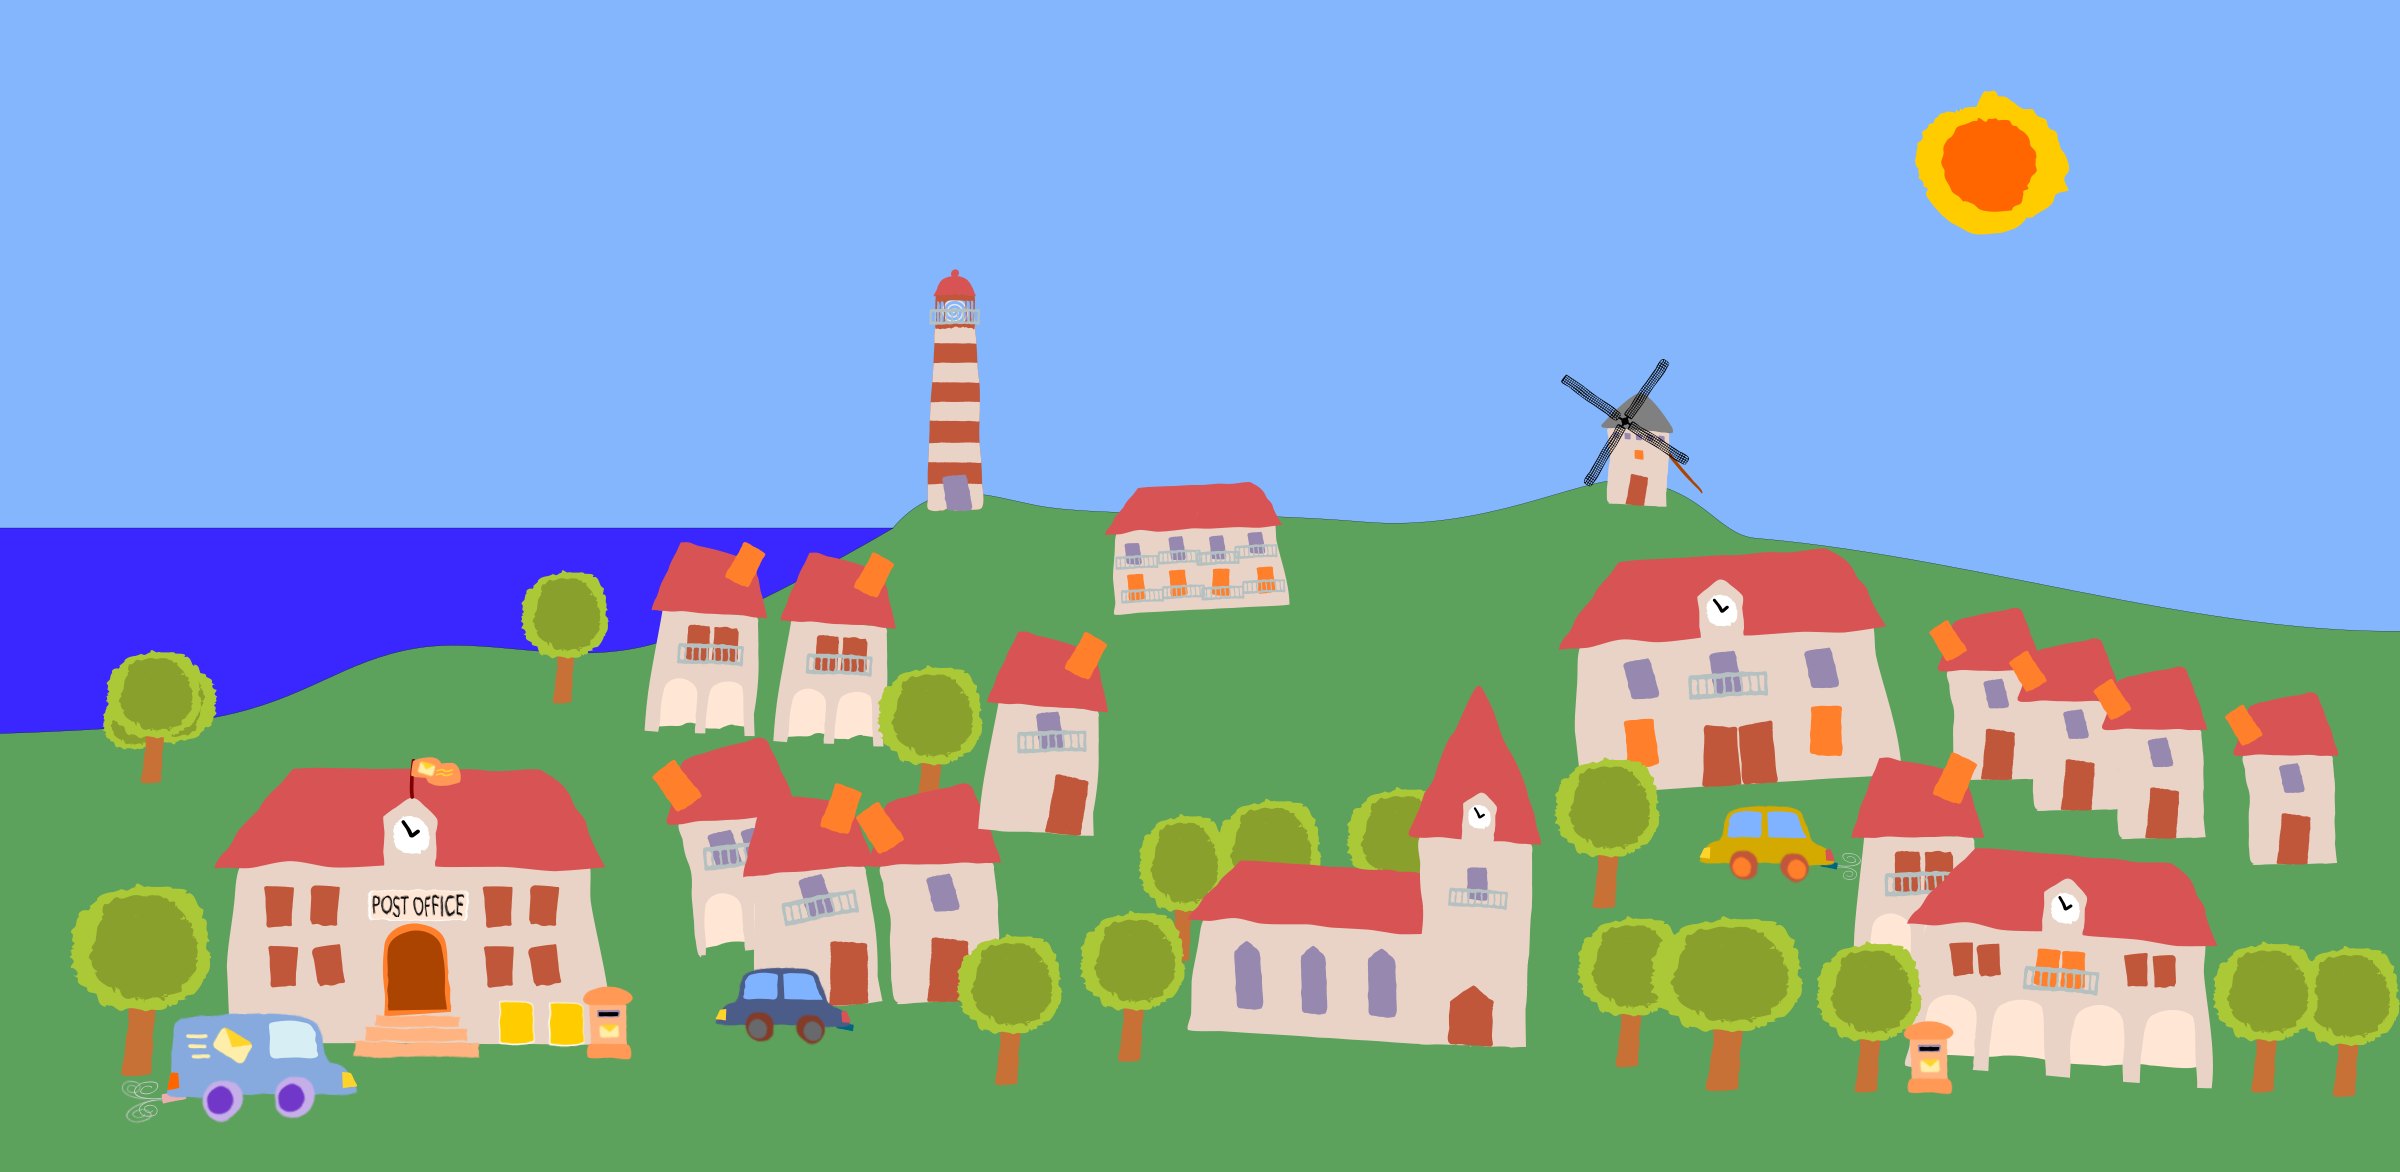 clipart pictures of villages - photo #30